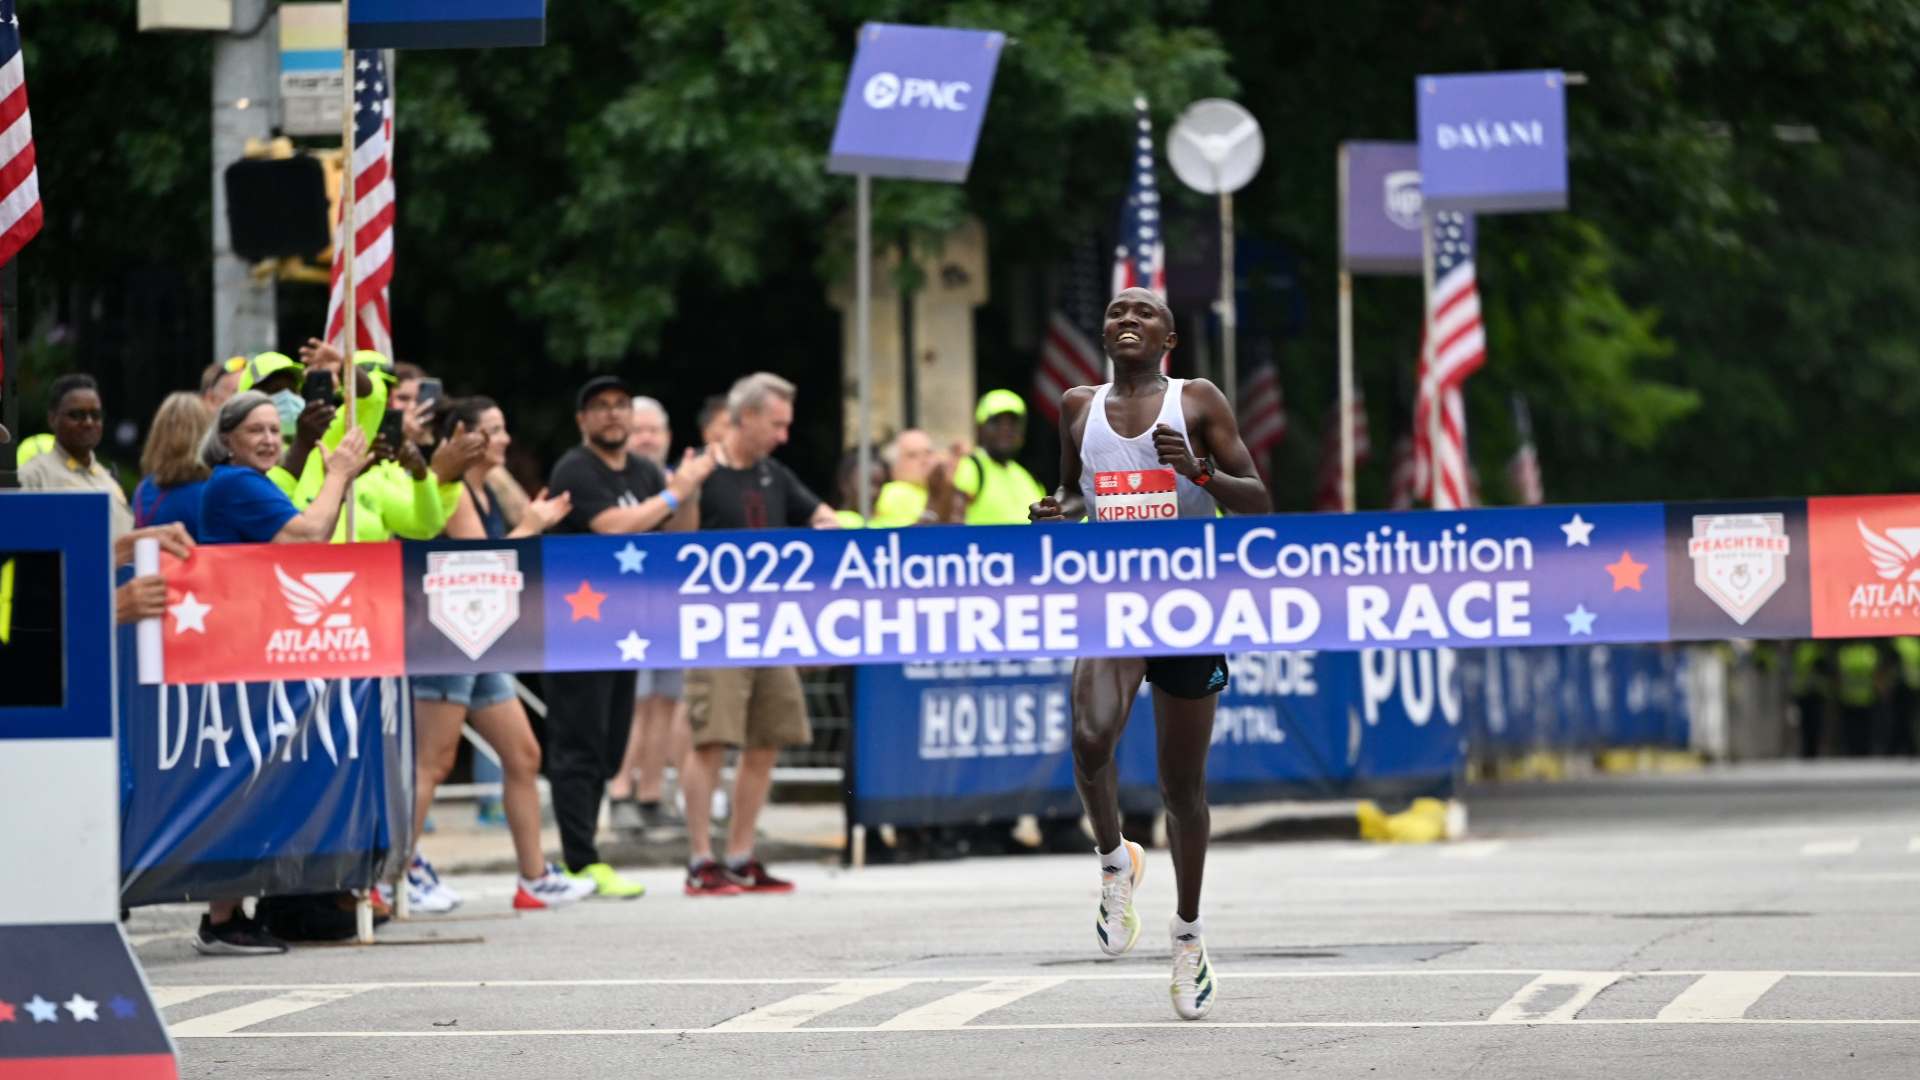 Rhonex Kipruto dominated at the Atlanta Journal-Constitution Peachtree Road Race (Image Credits - Twitter/ @ATLtrackclub)